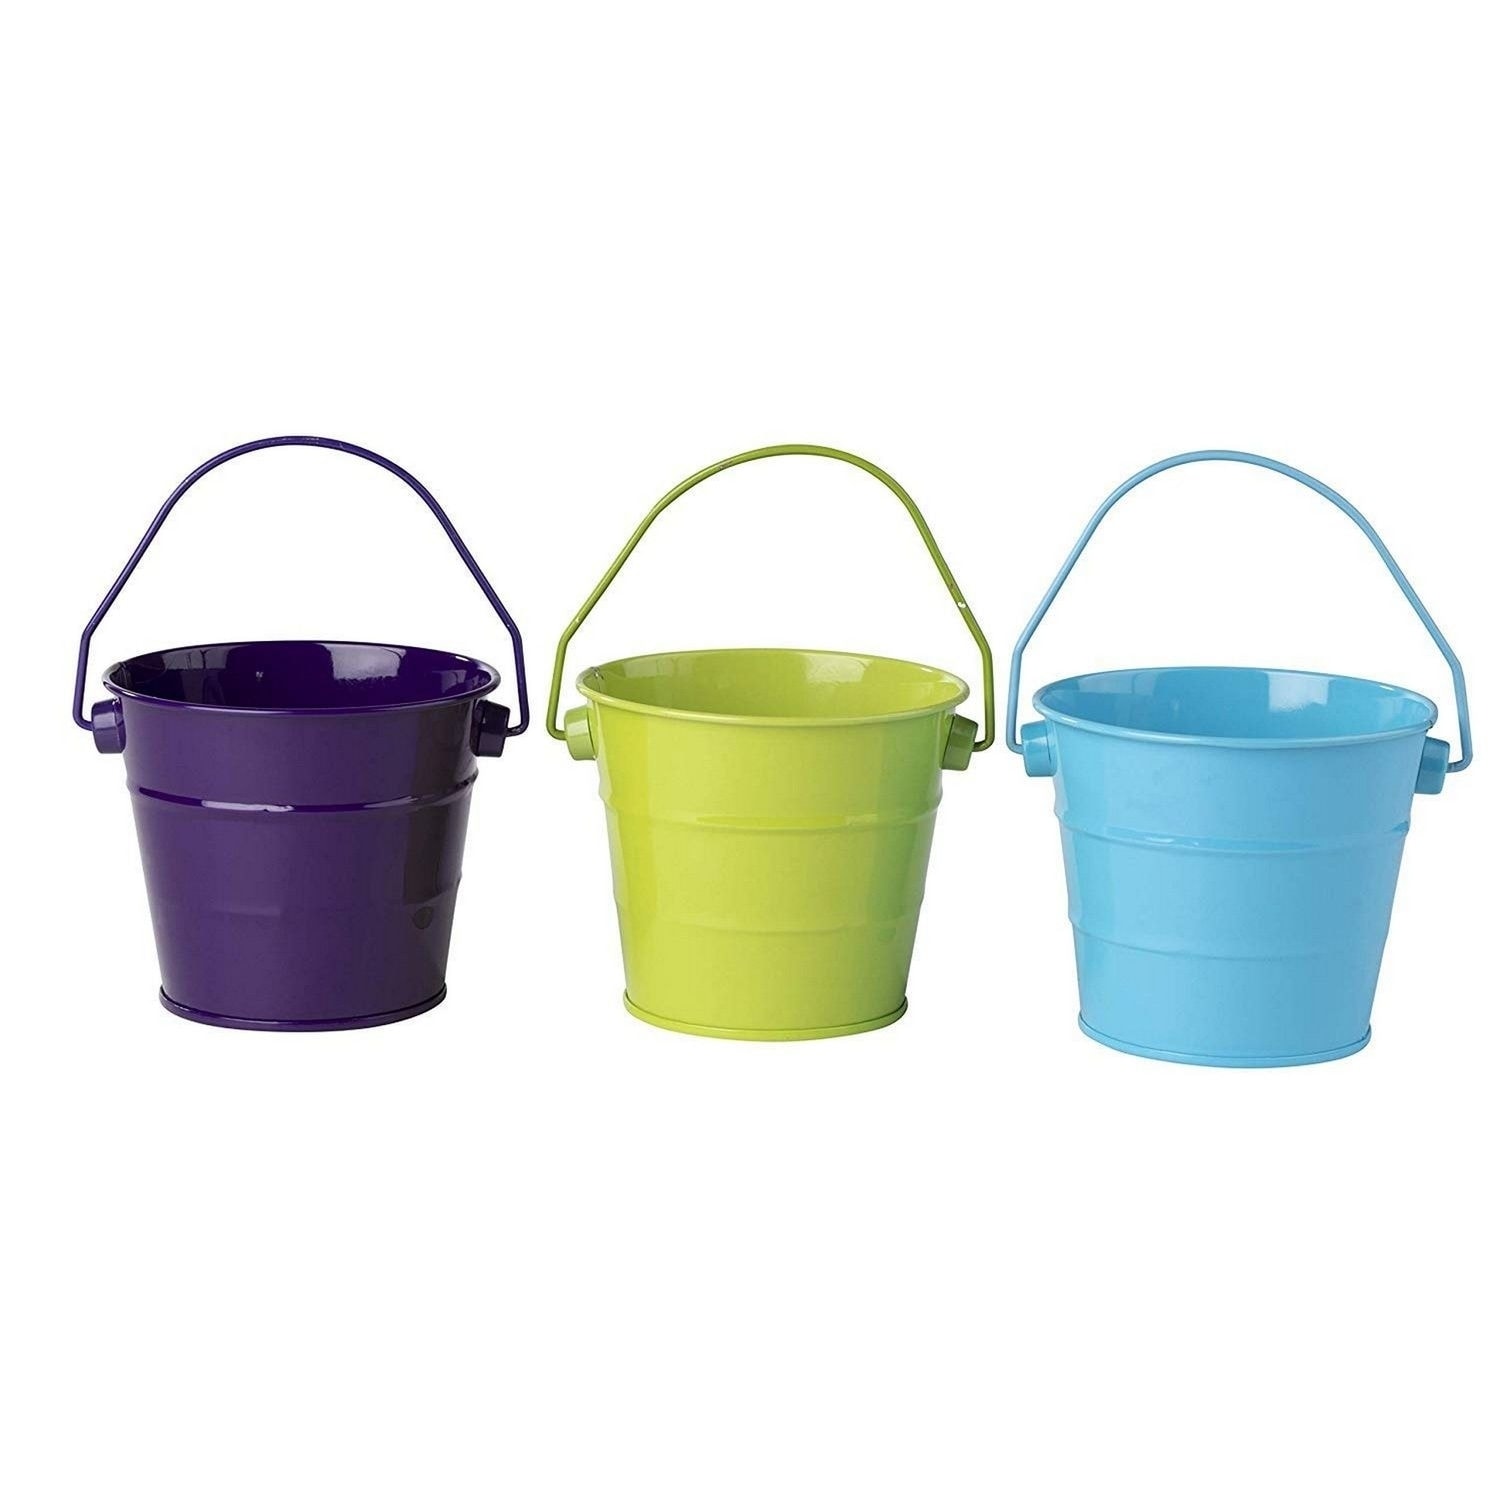 Mini Metal Buckets, Pails with Handles for Party Favors, Easter (6